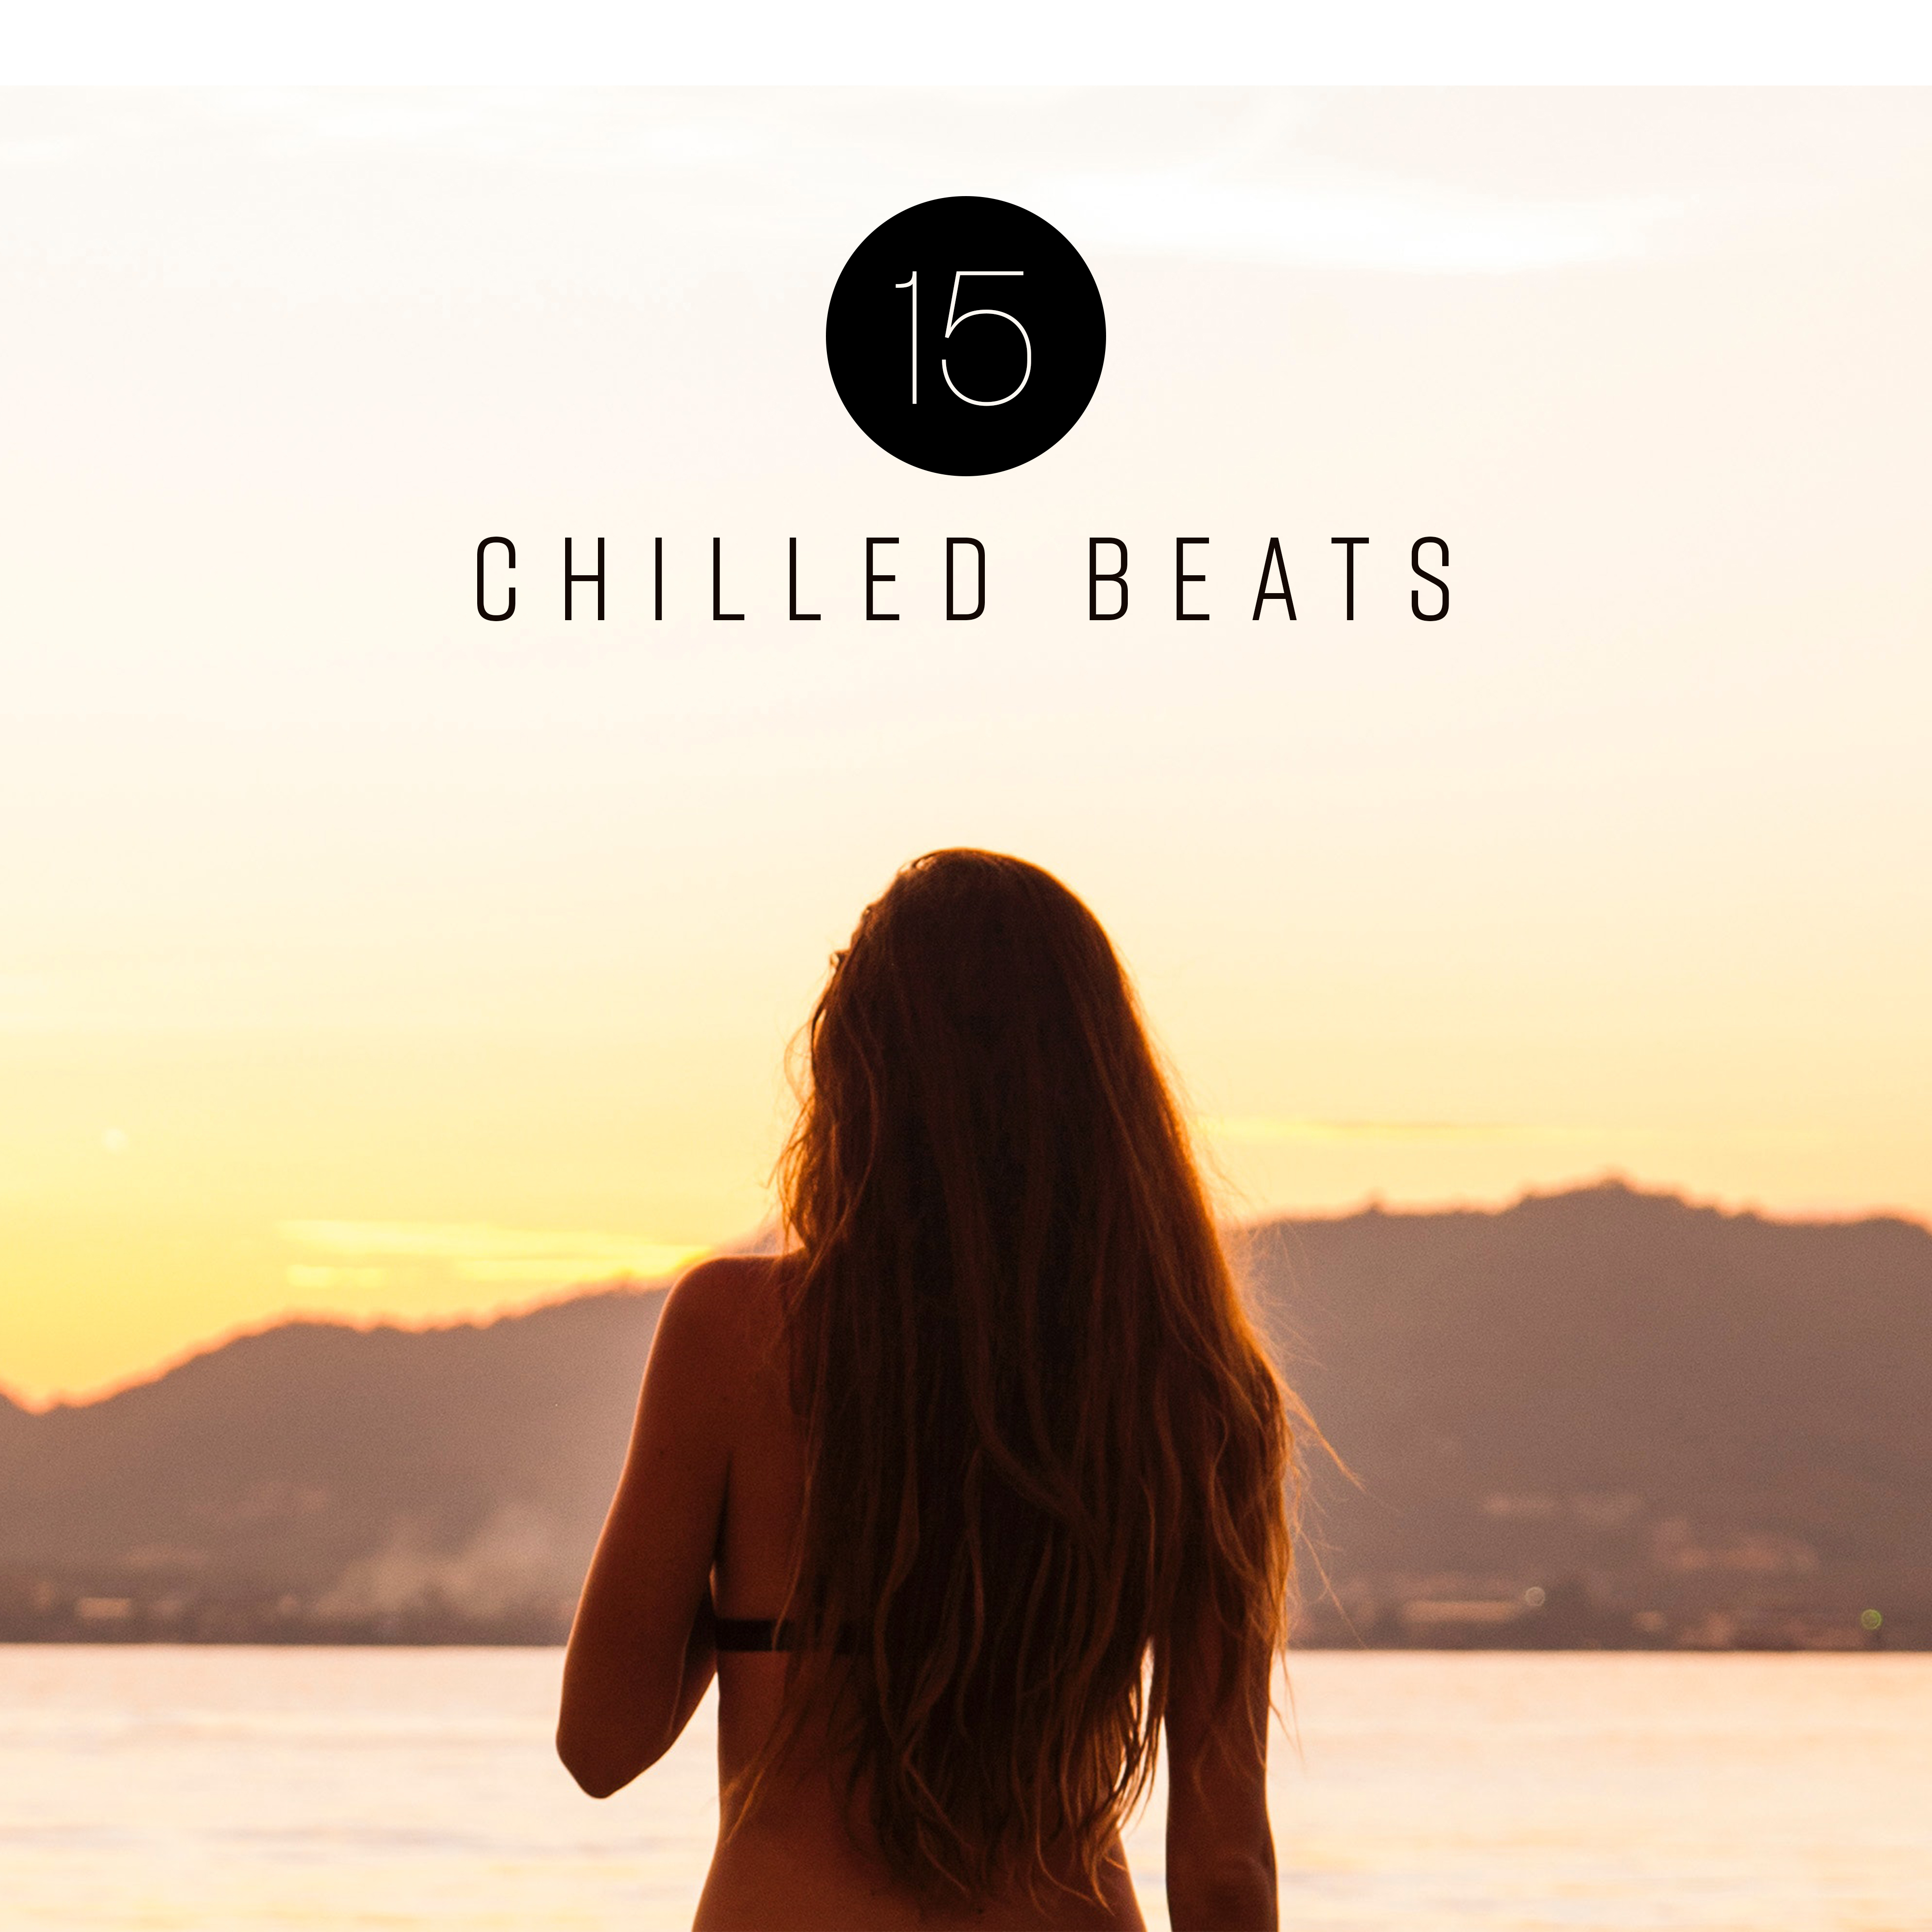 15 Chilled Beats